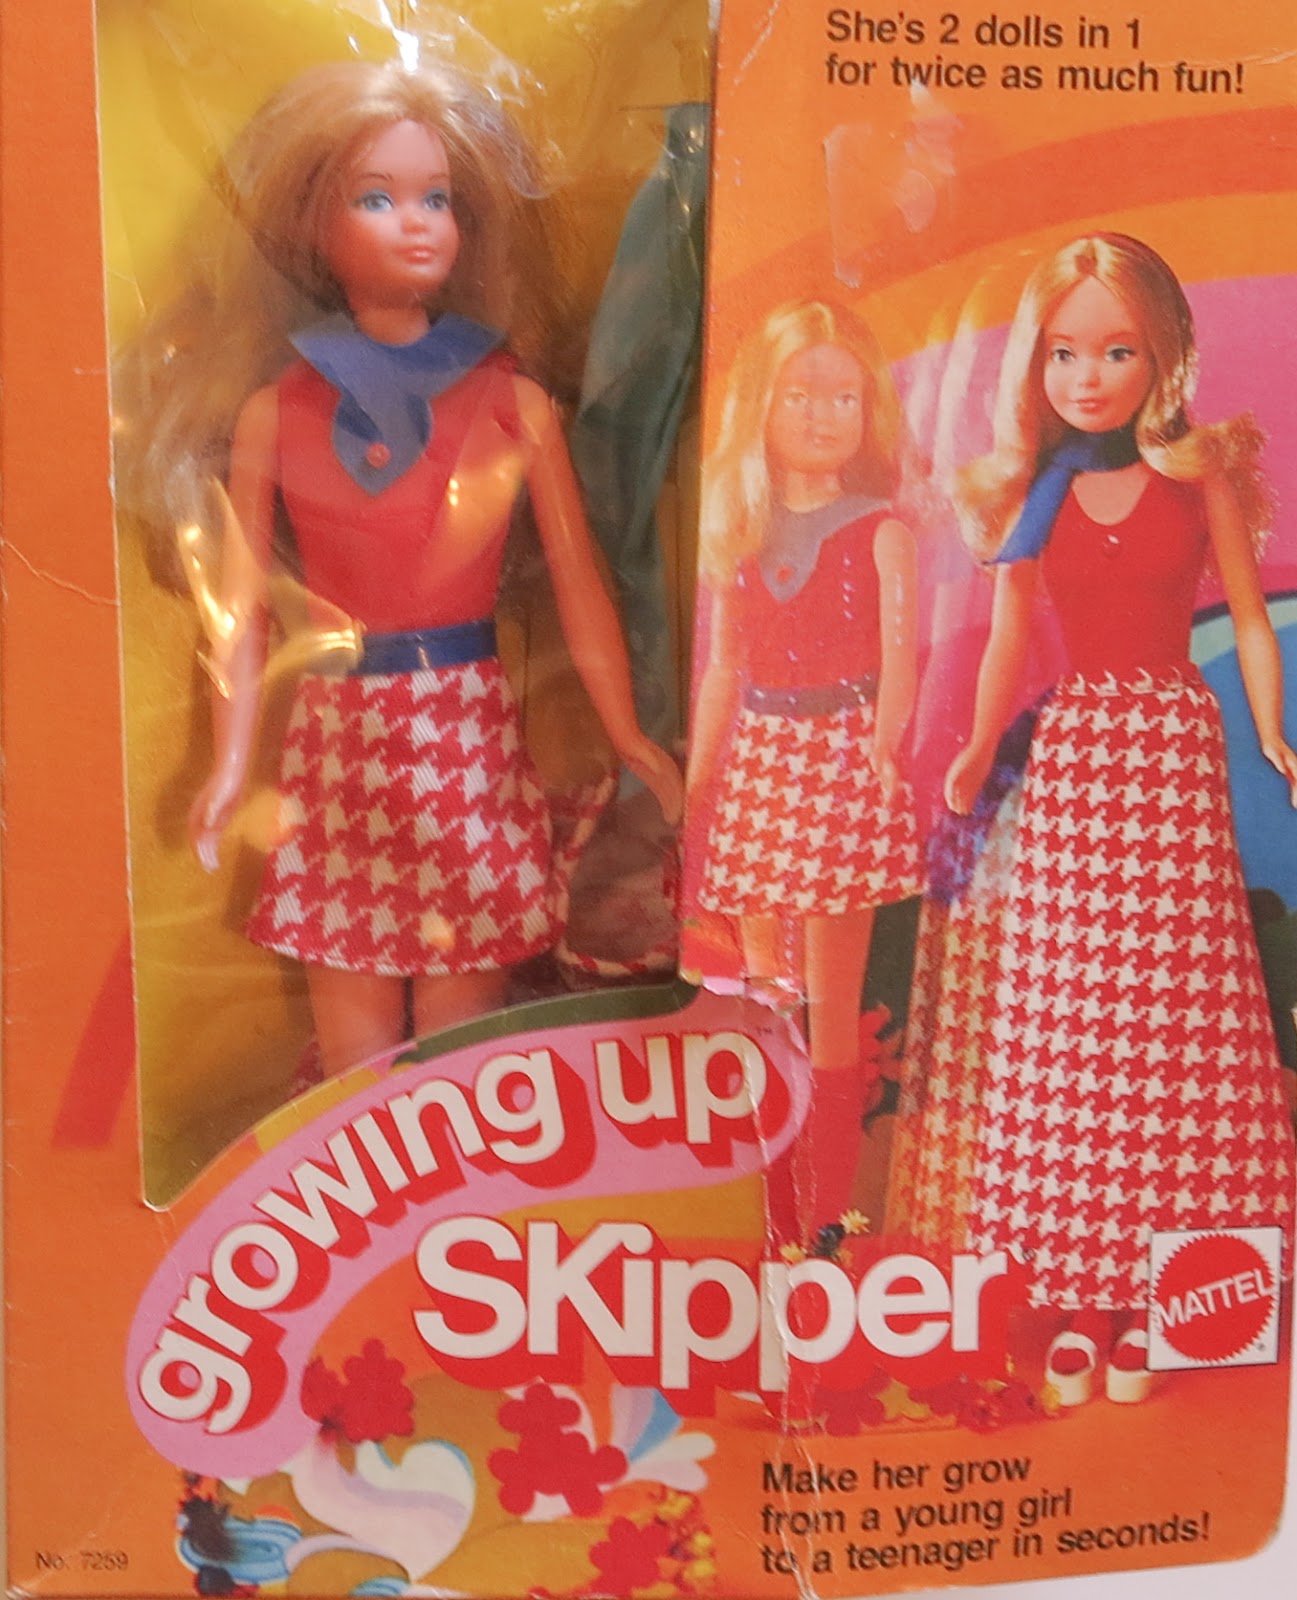 Lot - GROWING UP SKIPPER AND GROWING UP GINGER IN ORIGINAL BOXES.